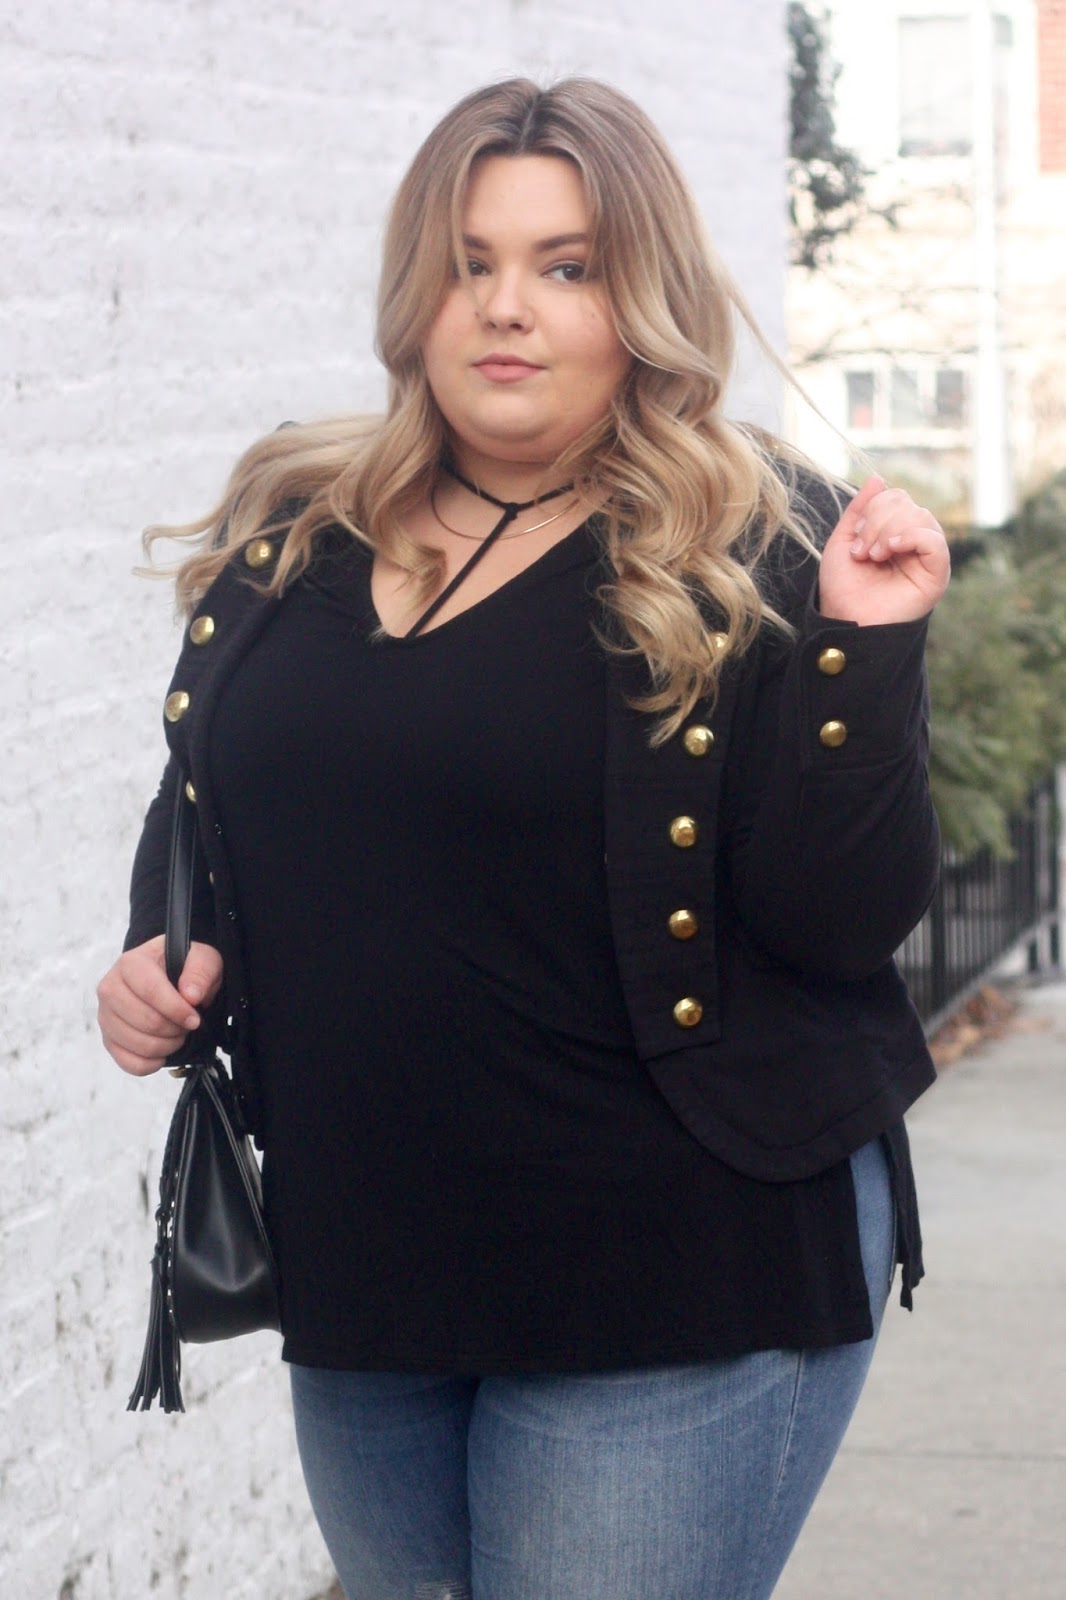 natalie craig, natalie in the city, plus size fashion, military style jacket, thigh high wide calf boots, knee high wide calf boots, faux suede boots, plus size blogger, mossimo target denim, ootd, chicago blogger, midwest, street style